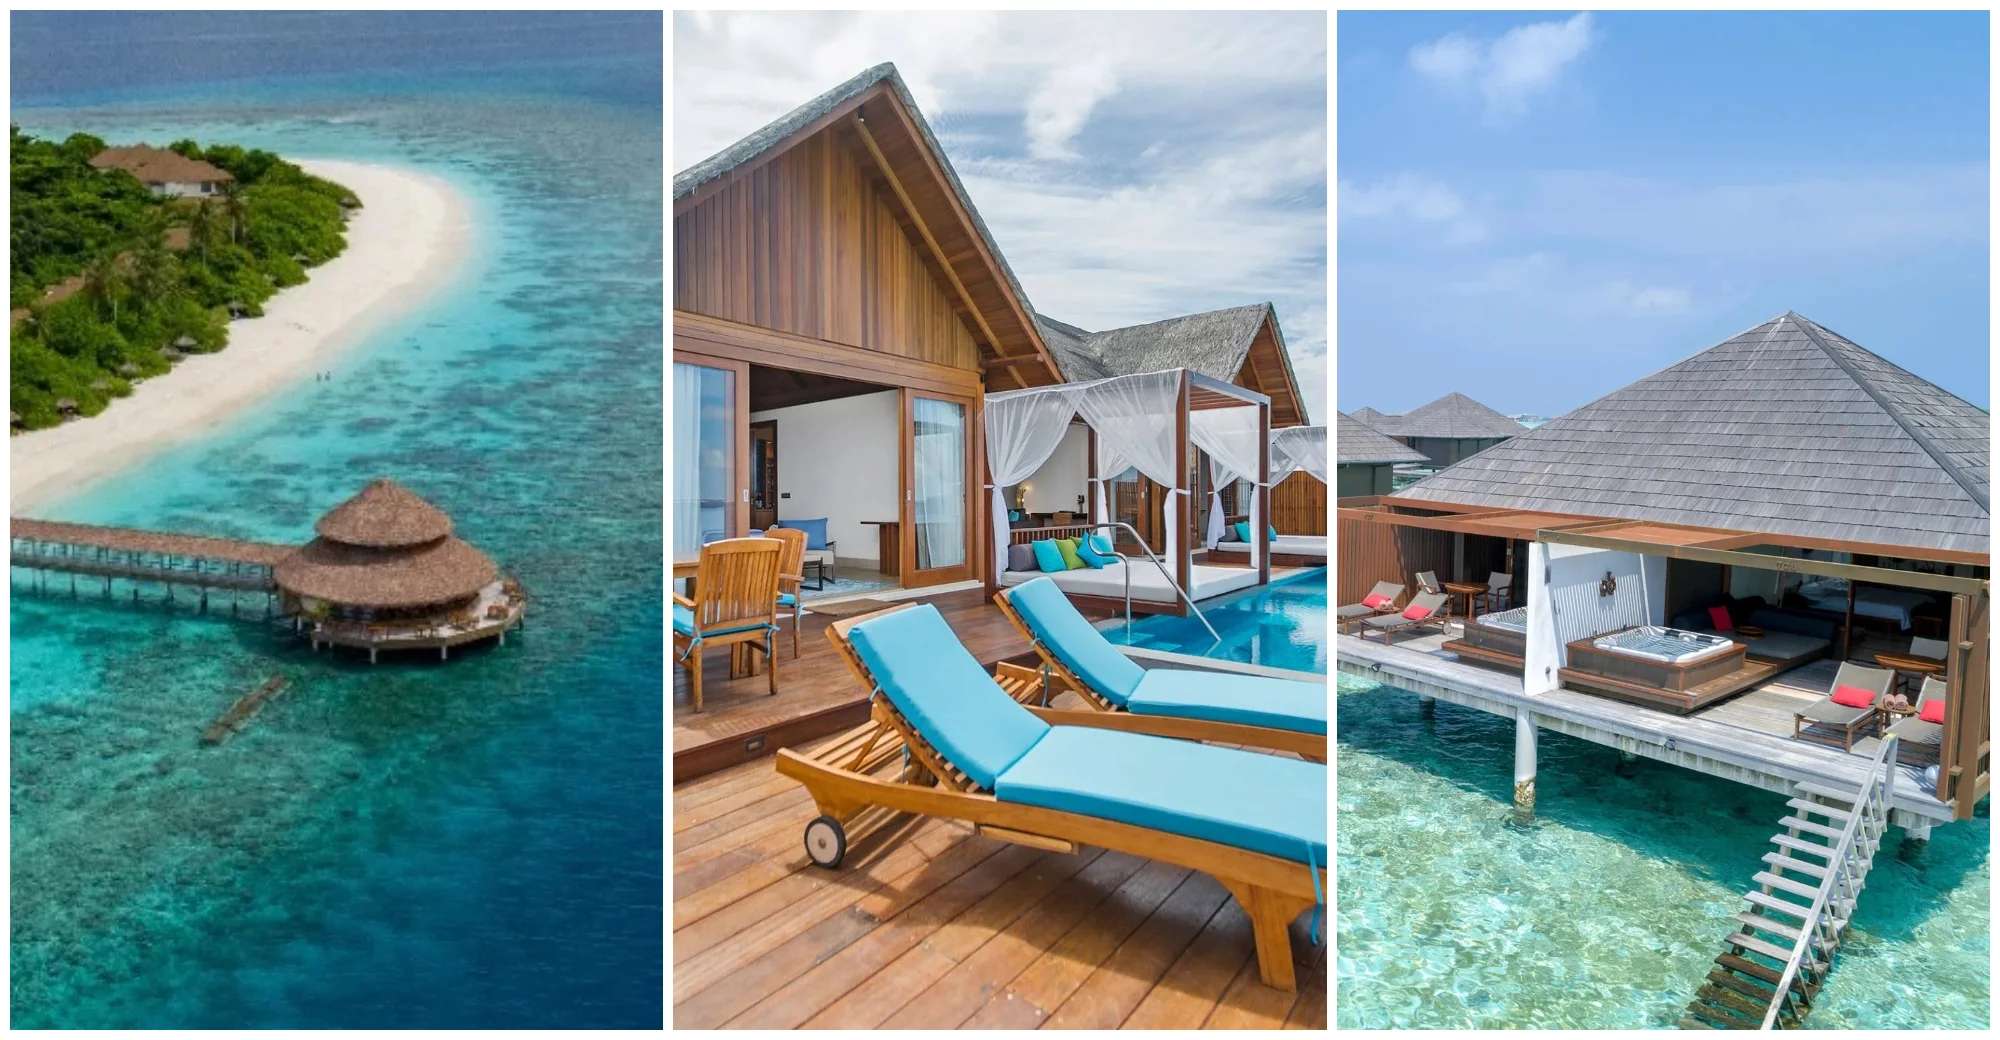 8 Romantic Honeymoon Resorts In The Maldives To Book Now And Stay Later